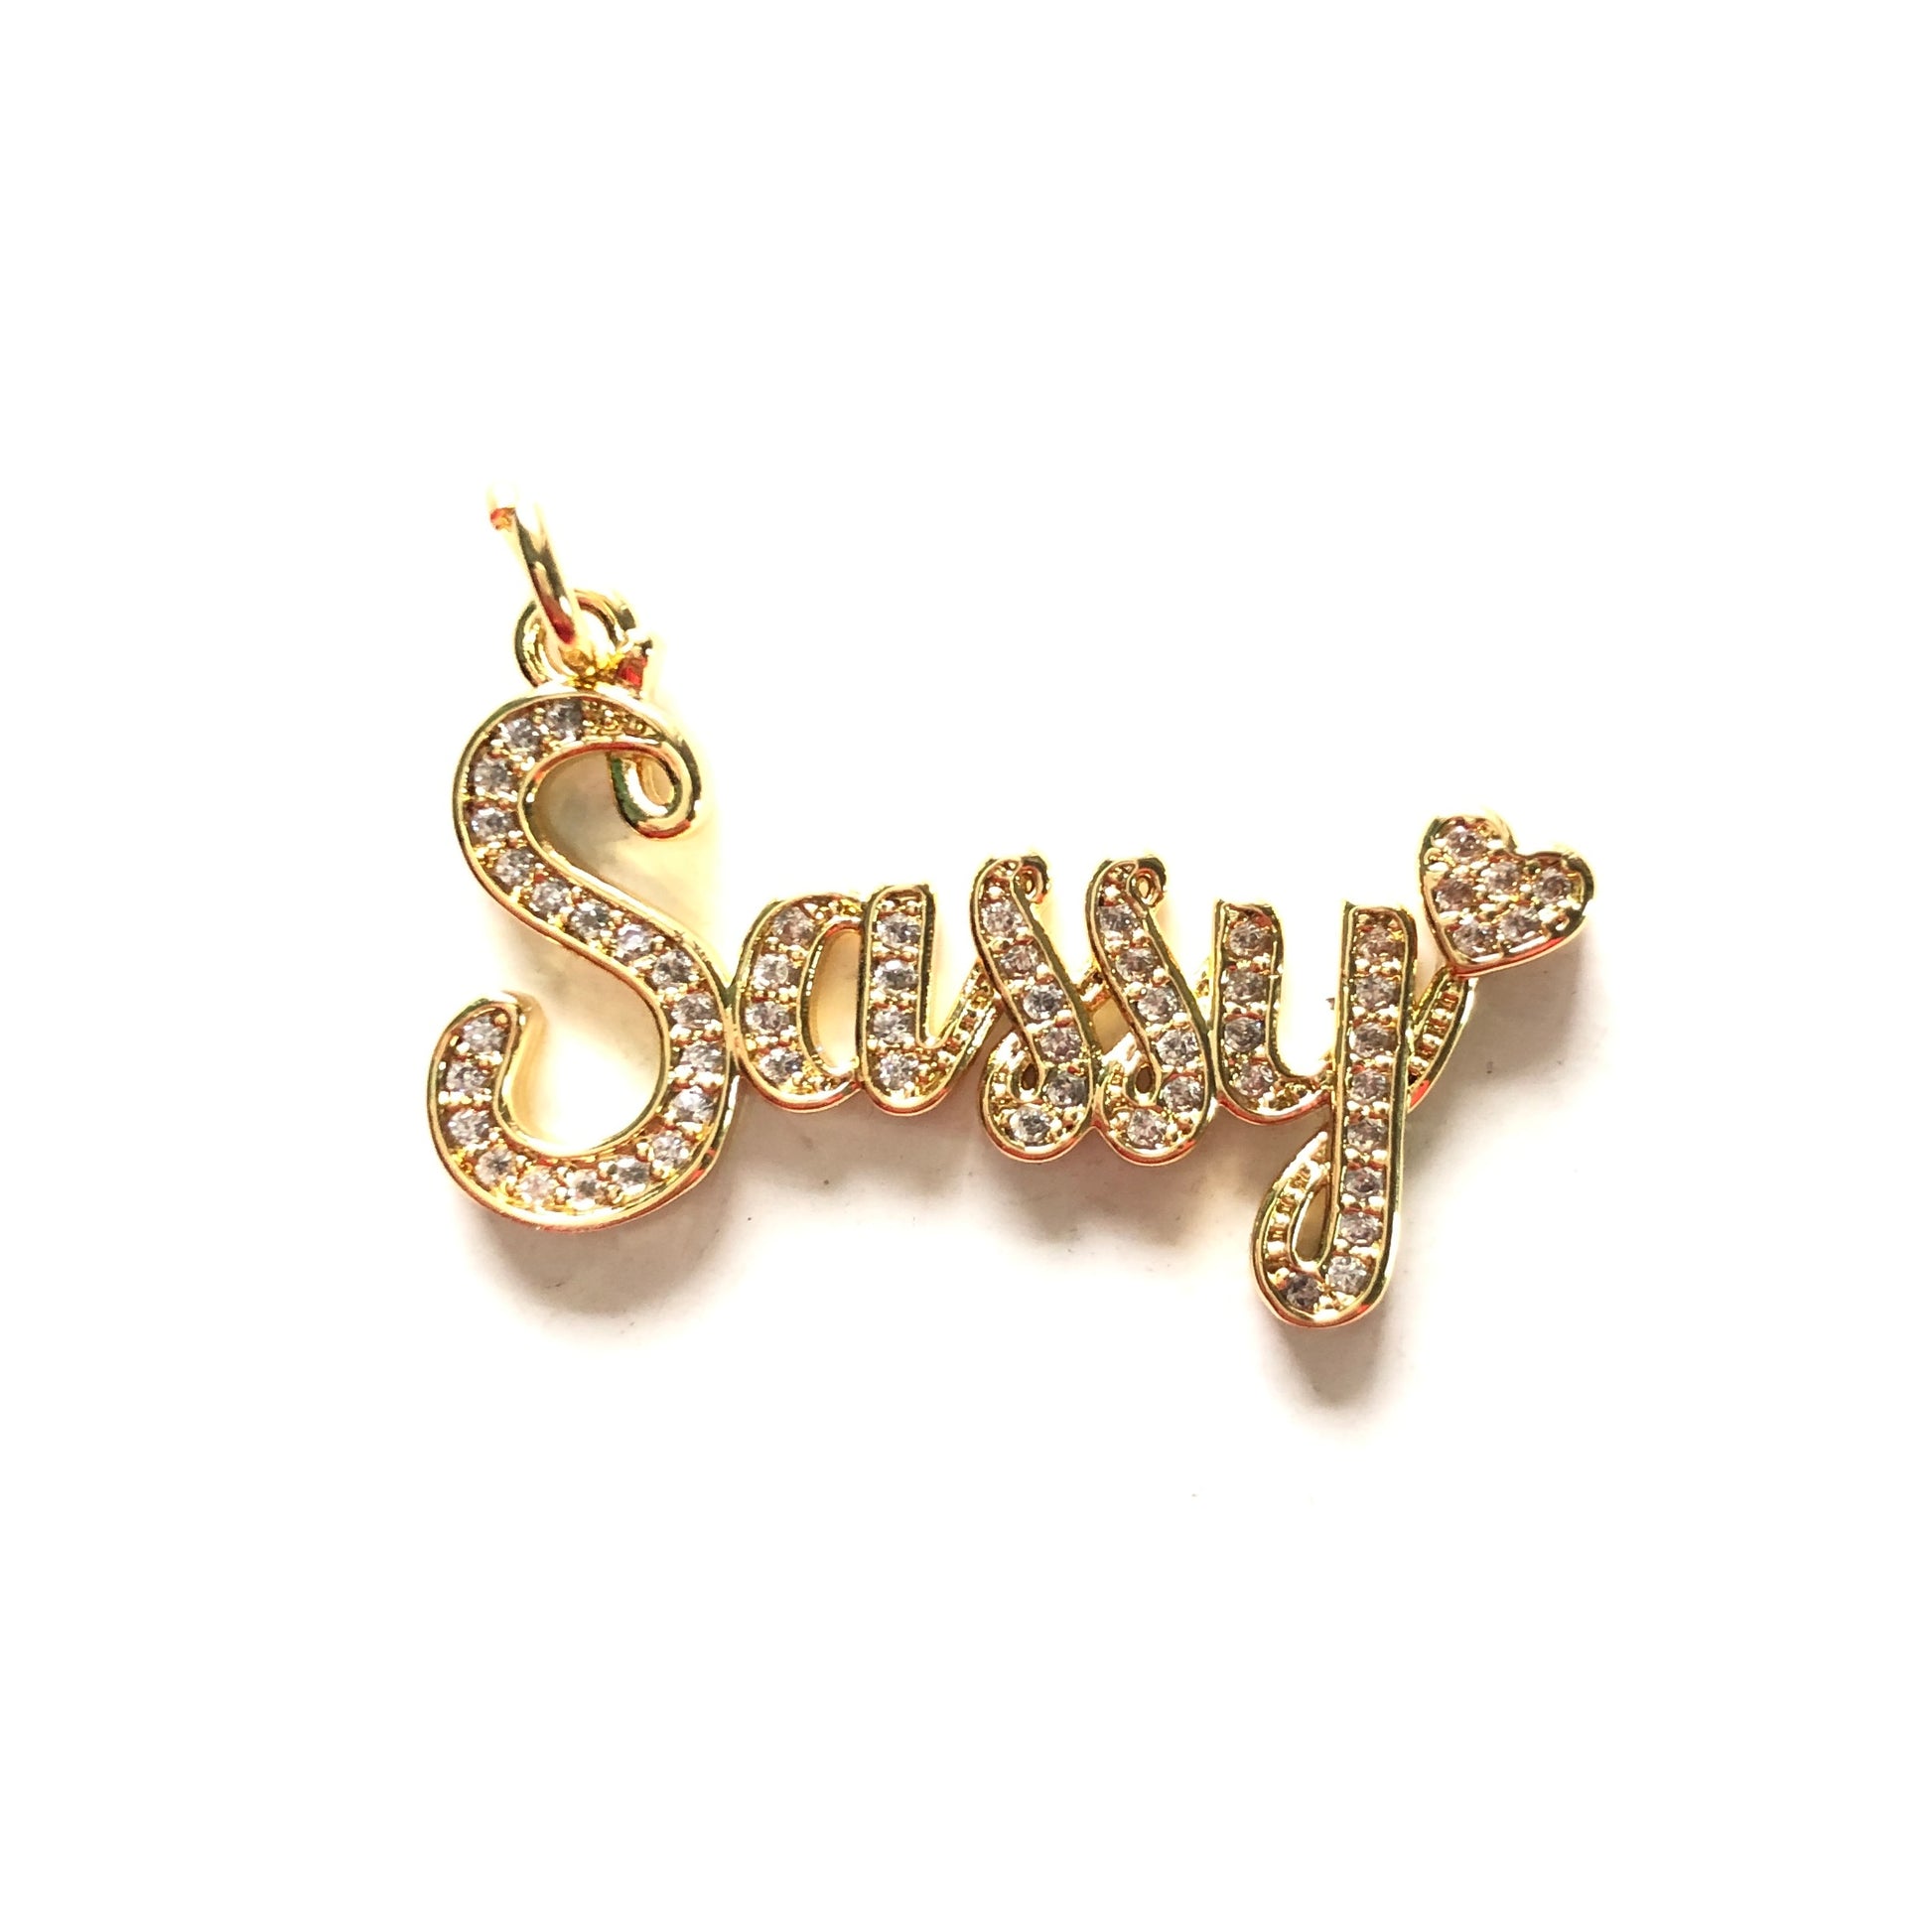 10pcs/lot 34*19mm CZ Paved Sassy Word Charms Gold CZ Paved Charms On Sale Words & Quotes Charms Beads Beyond